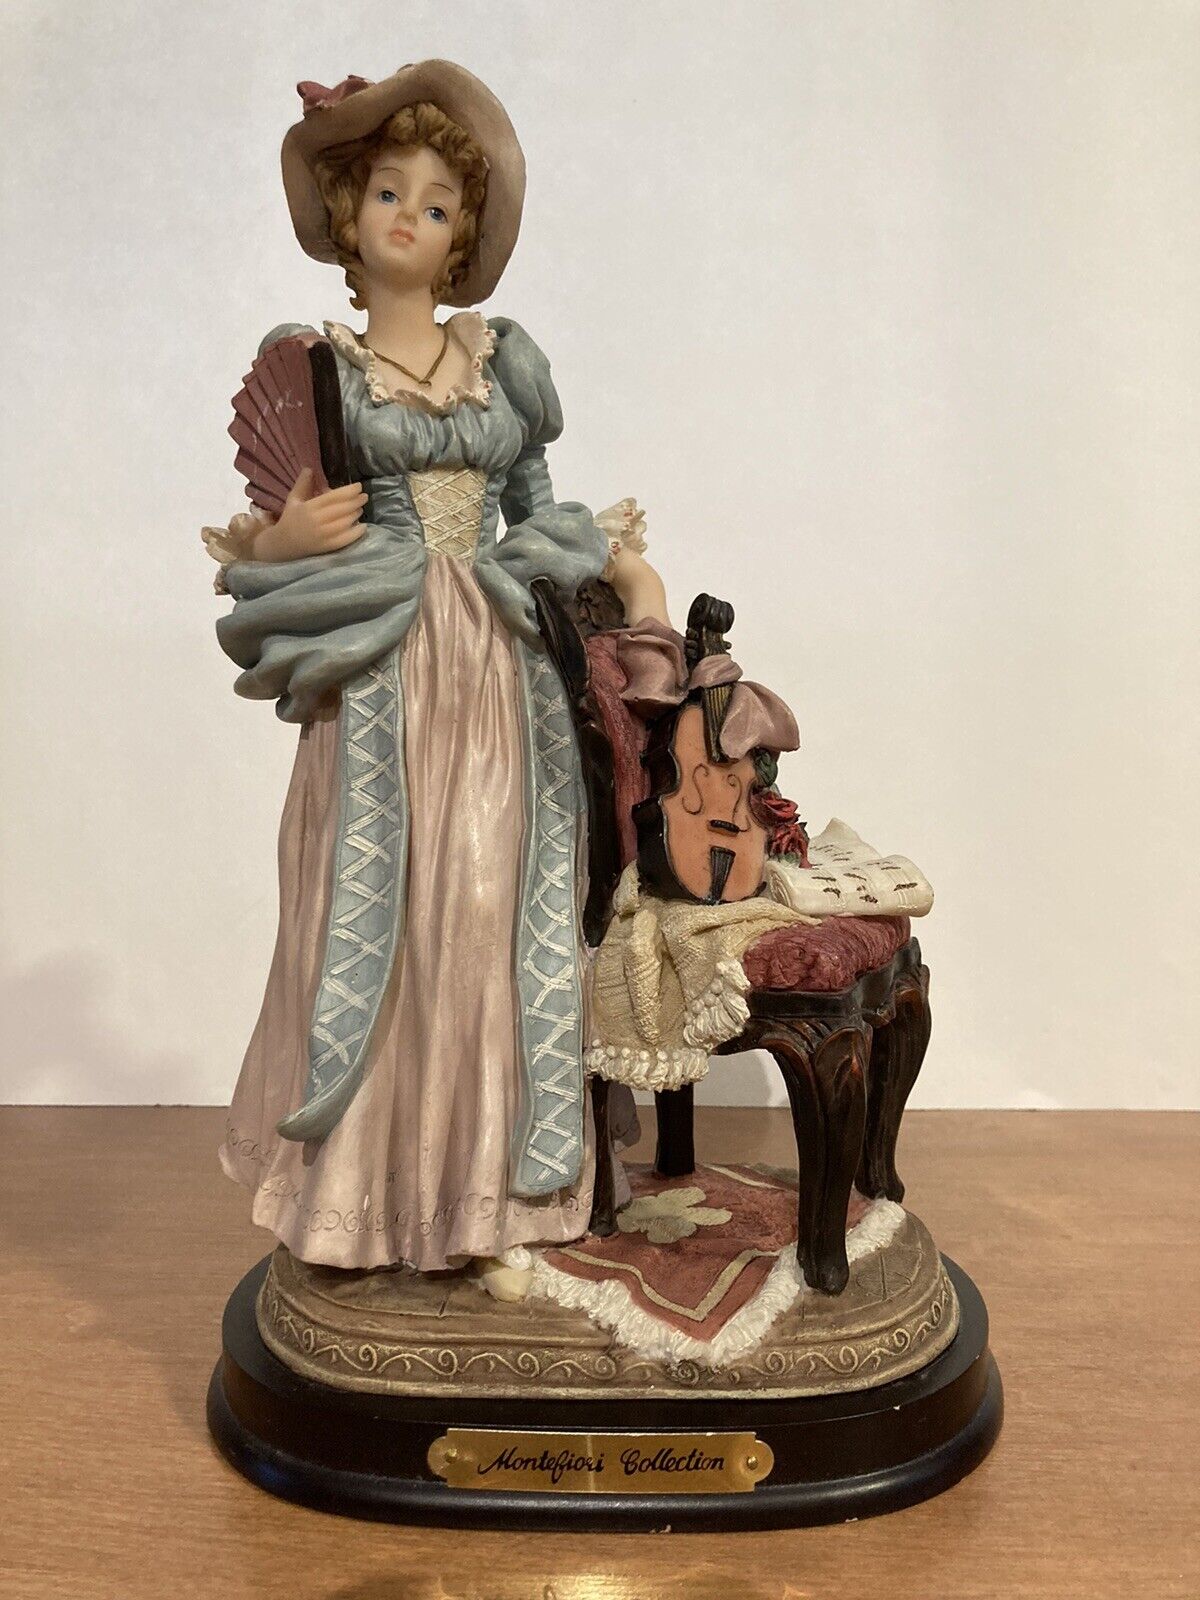 Vintage Montefiori Collection Resin Figurine Victorian Lady with Violin